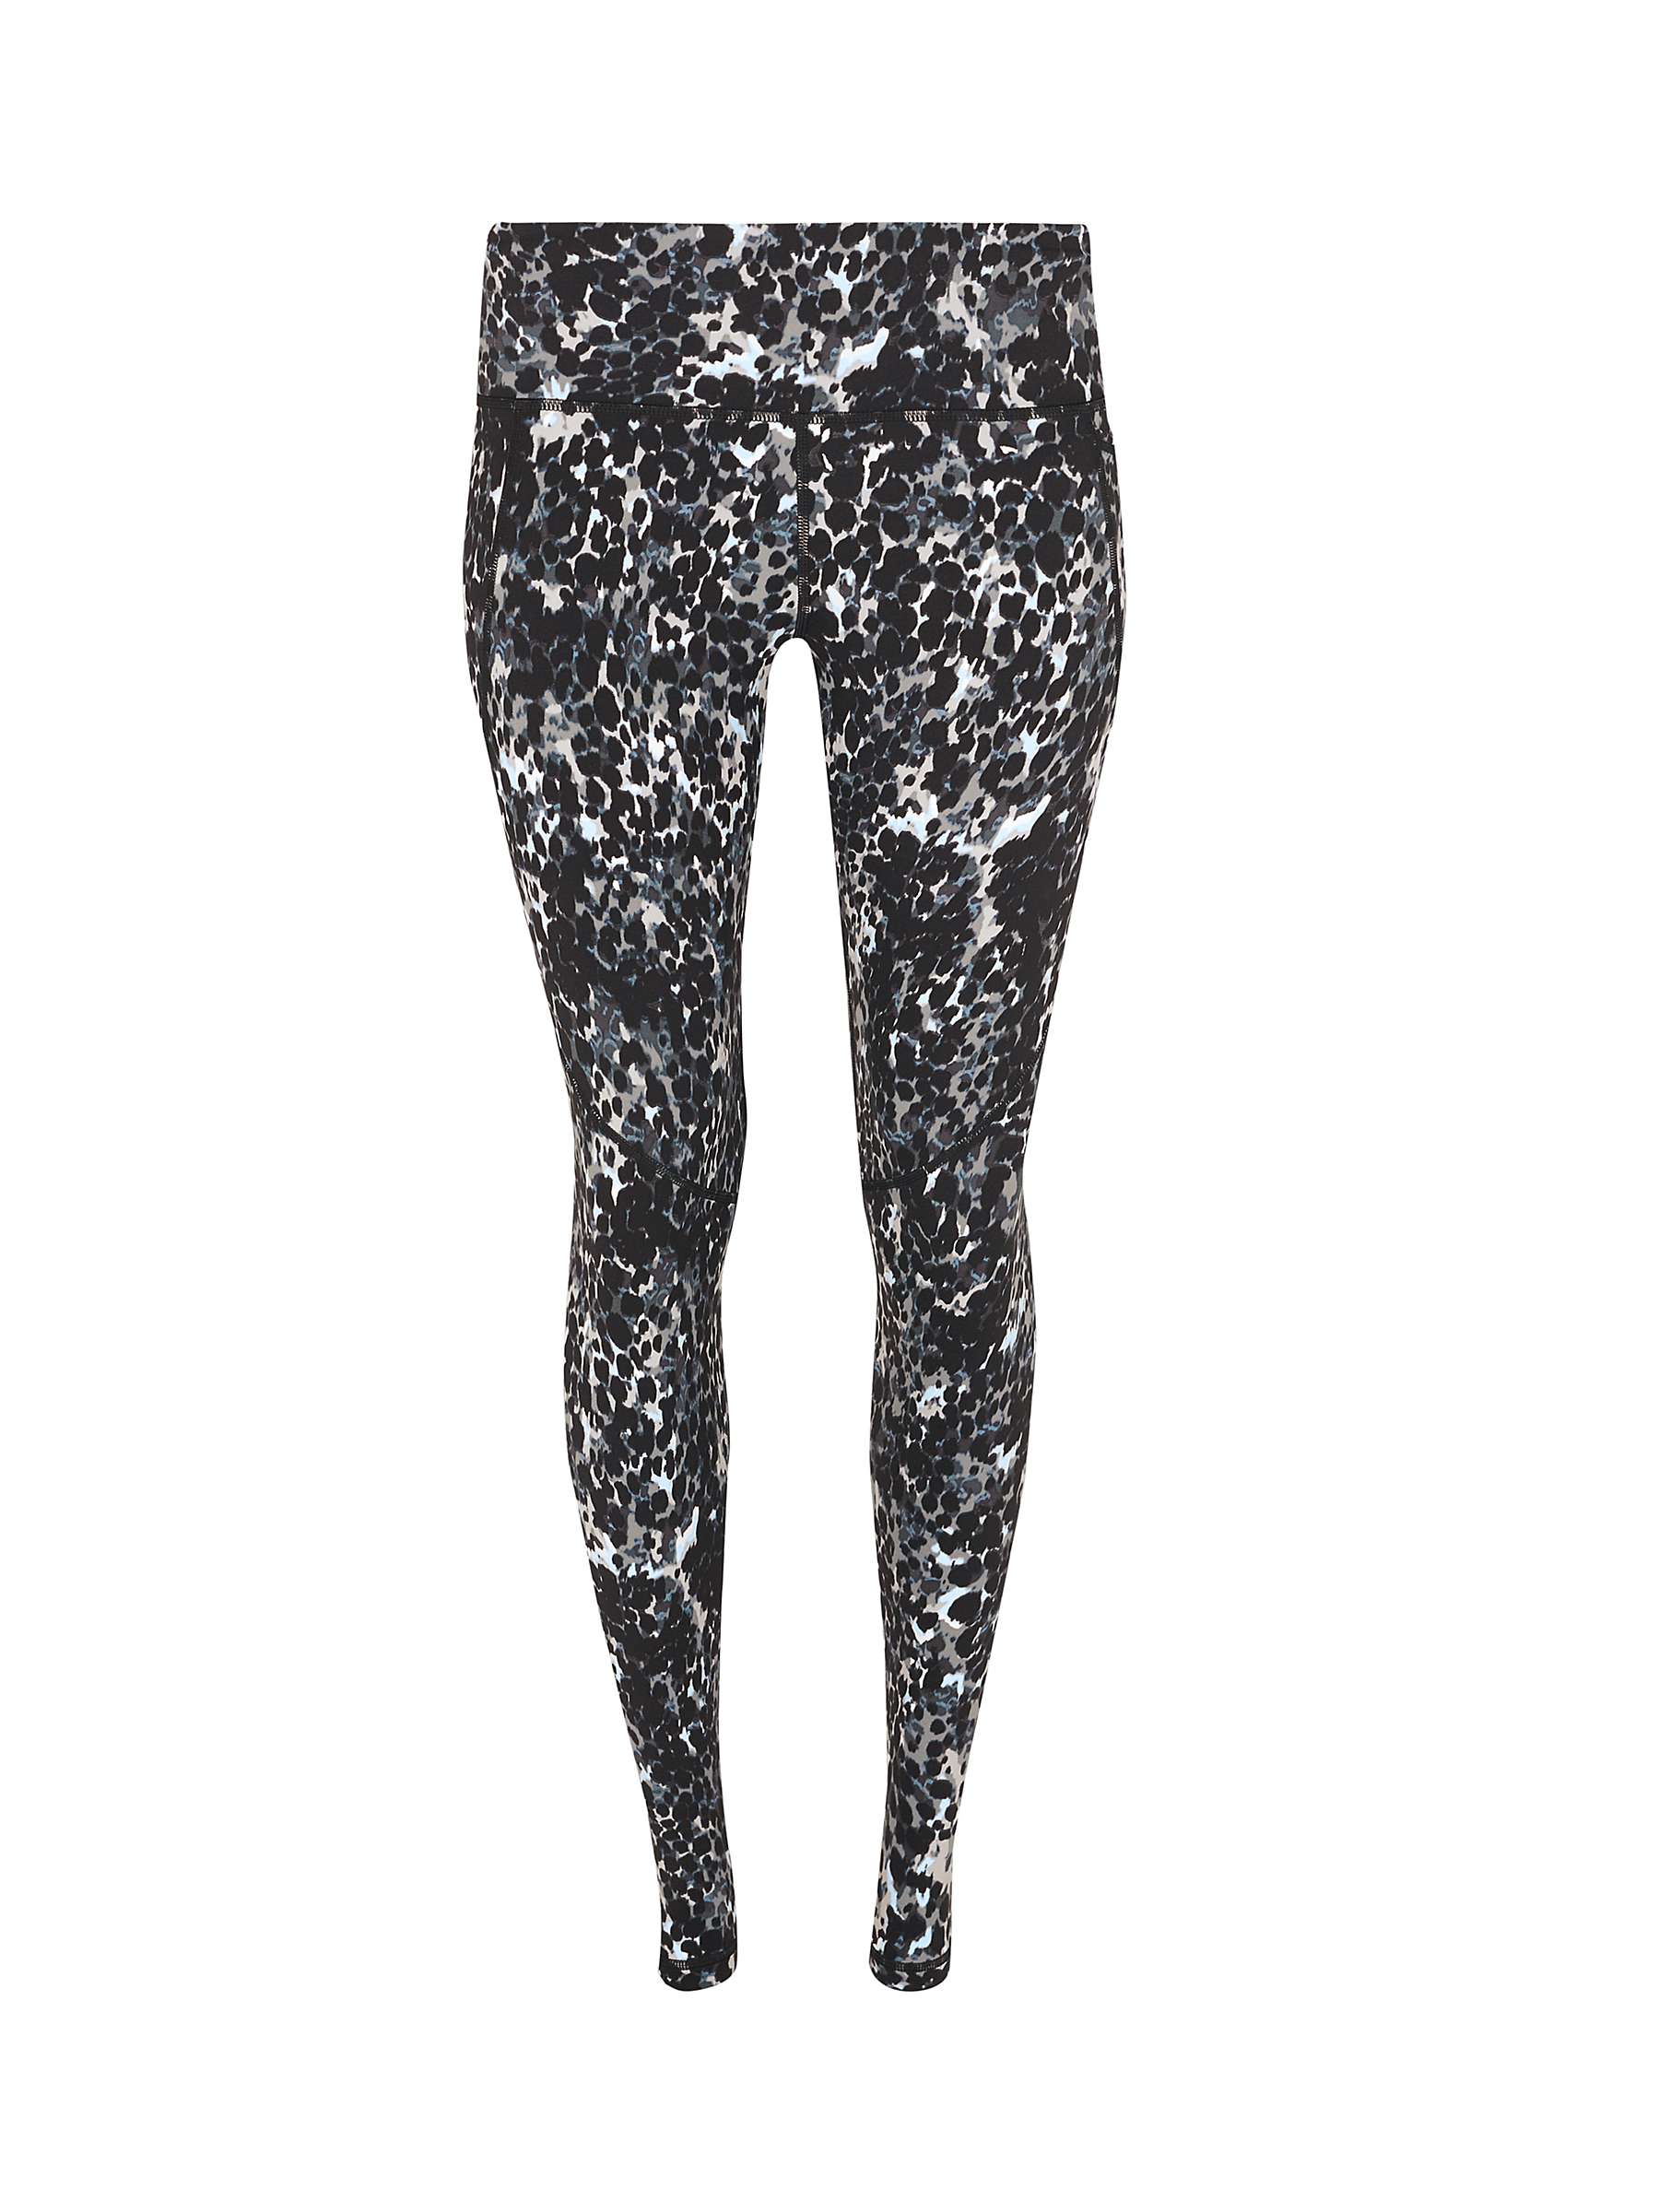 Buy Sweaty Betty Power Gym Full Length Embroidered Leggings Online at johnlewis.com